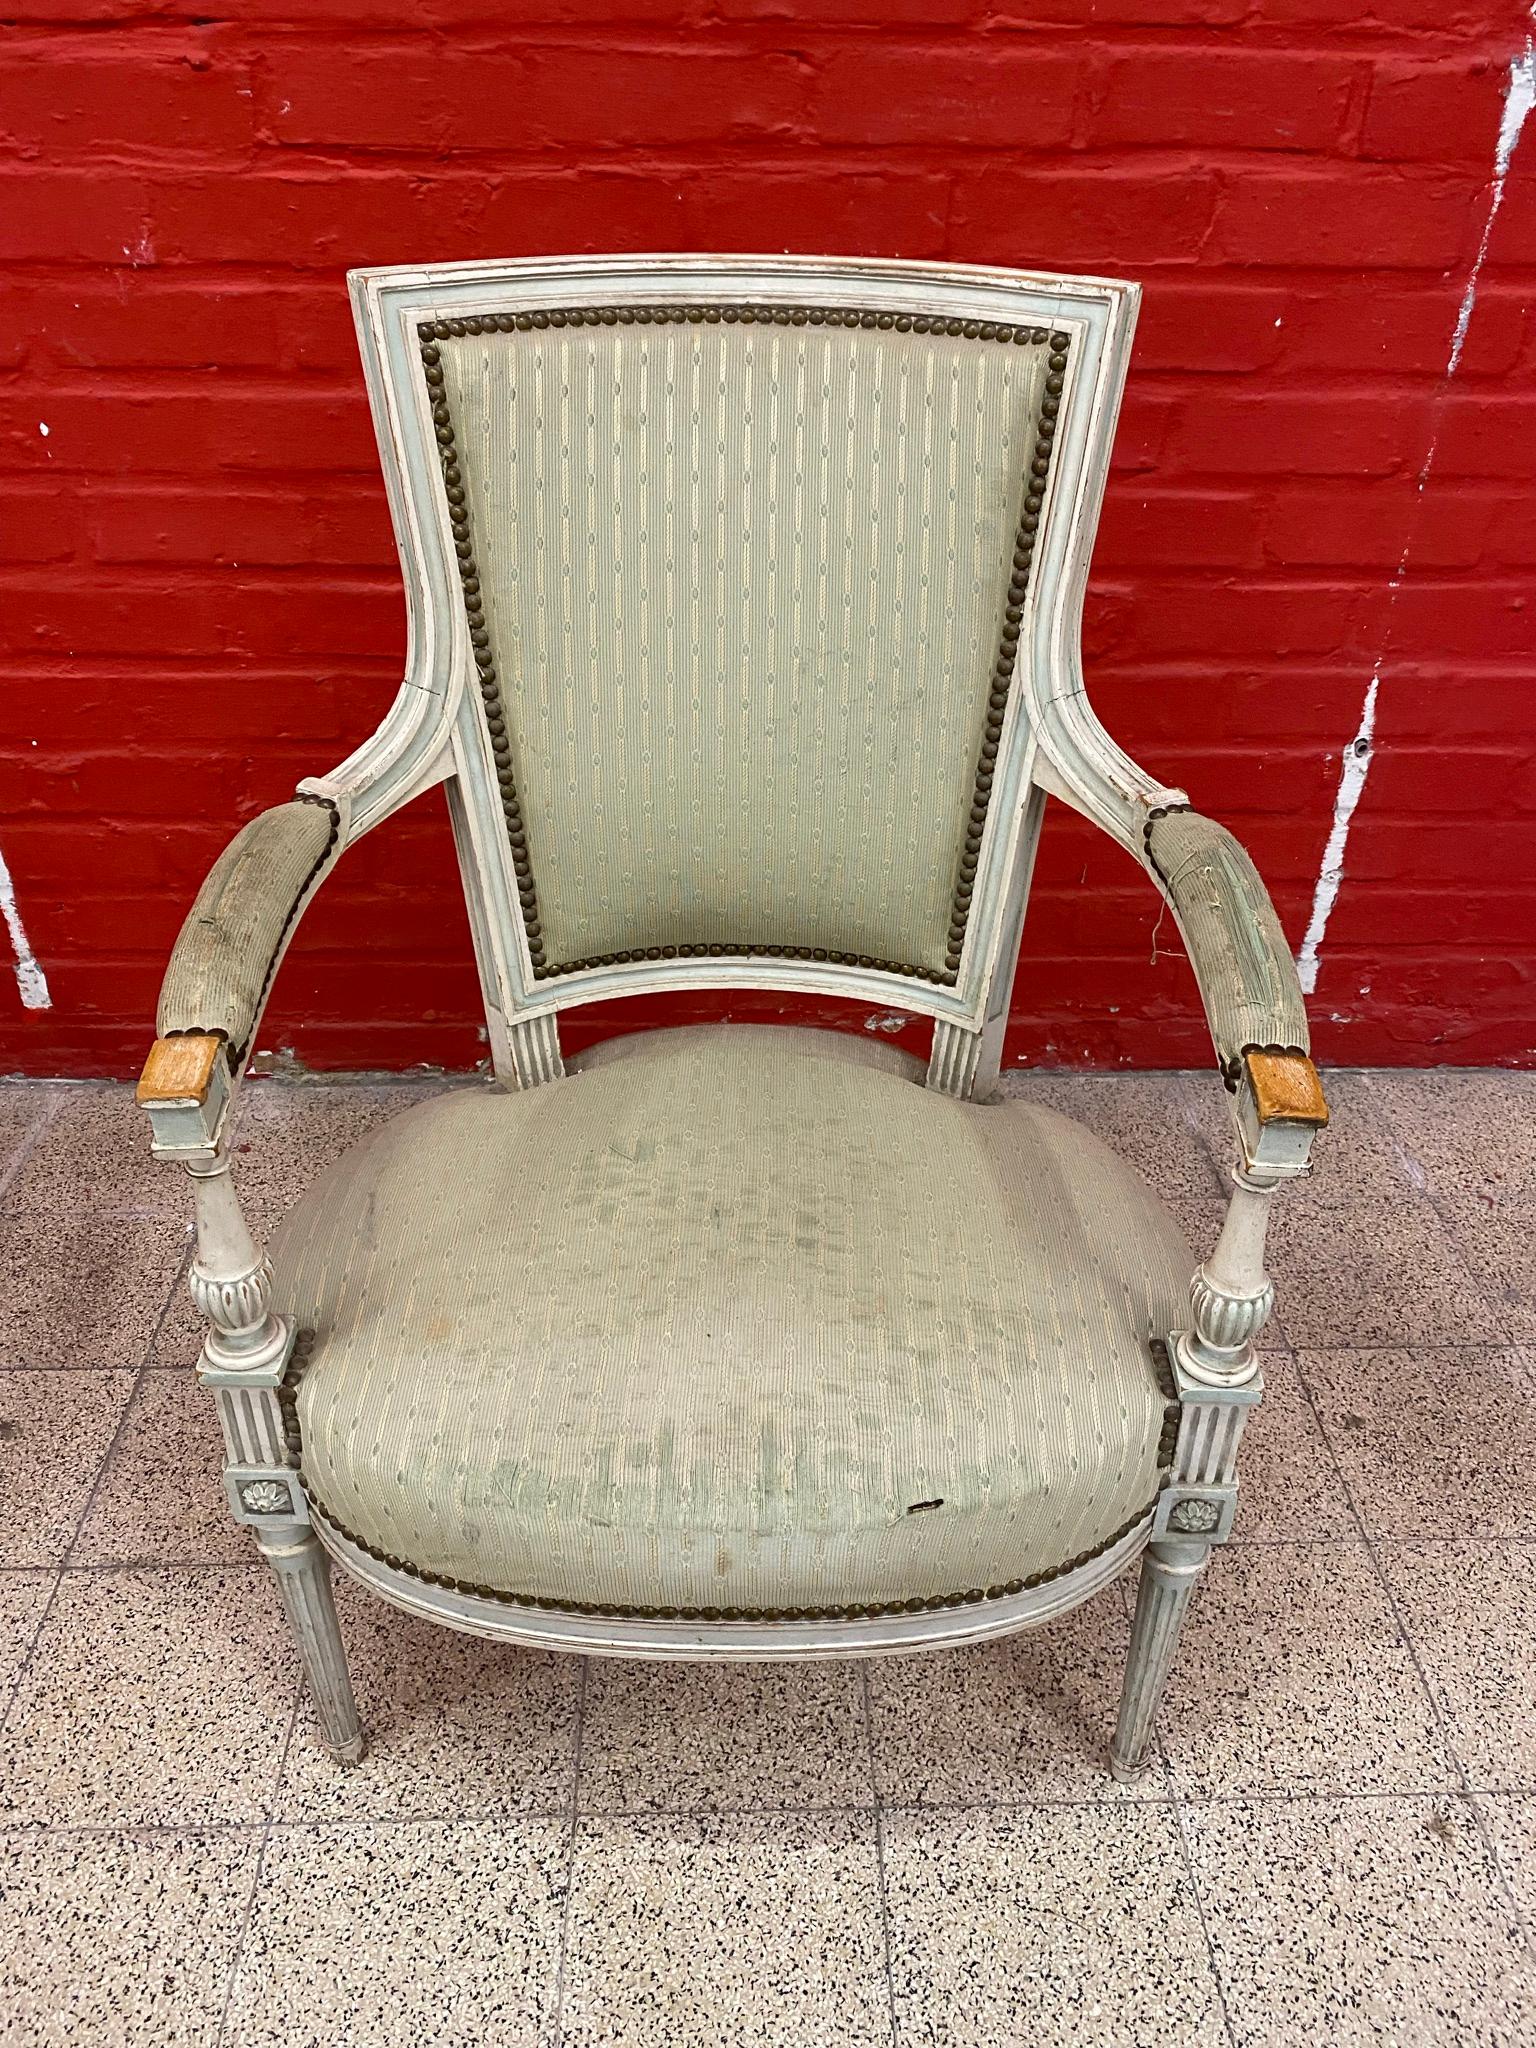 Directoire style chair circa 1930
patina and coating to redo.